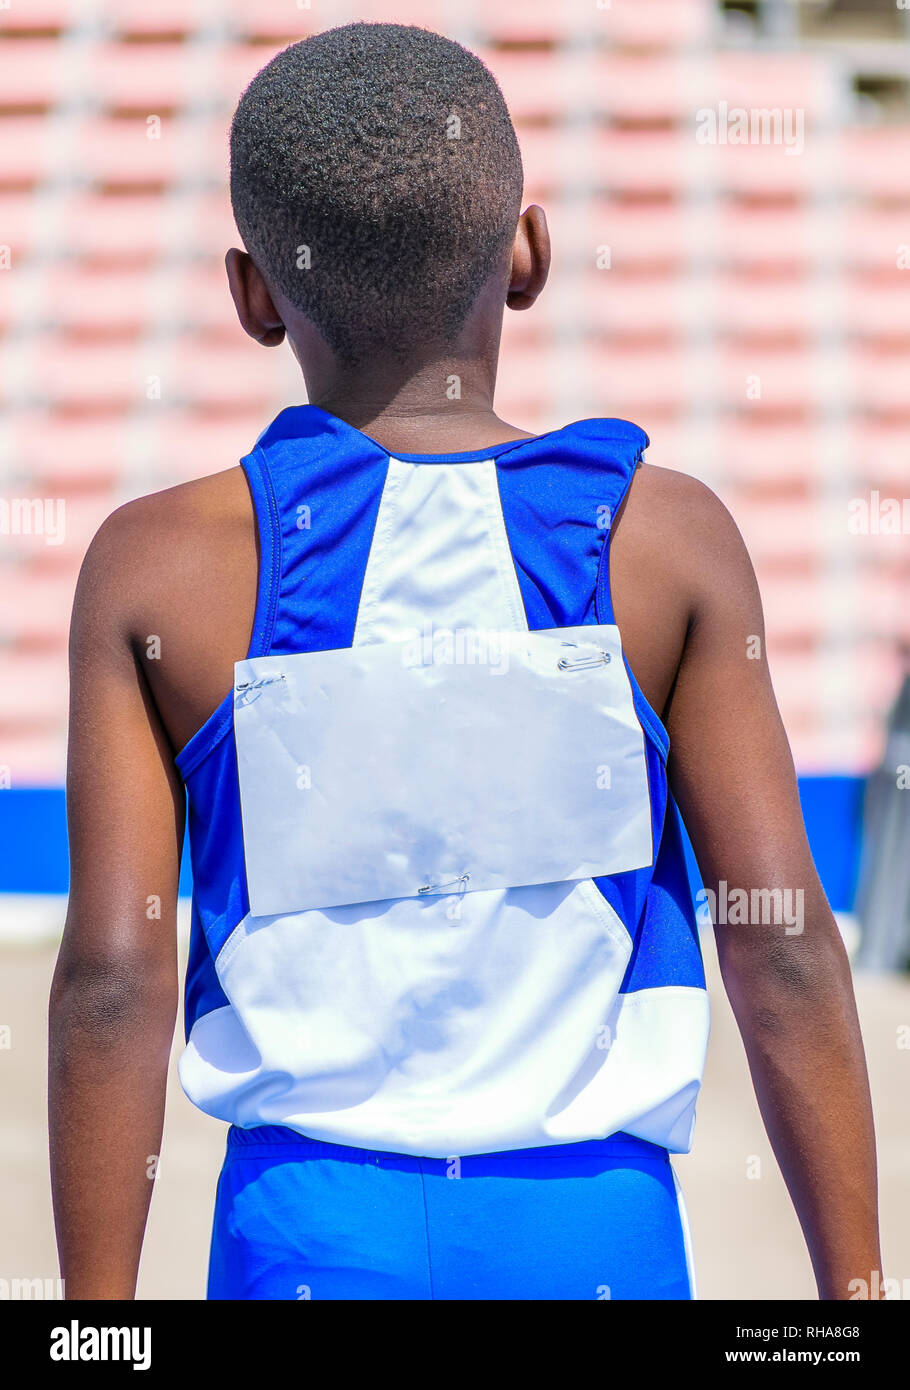 Young black male child athlete wearing blue and white jersey and shorts in outdoor track and field stadium Stock Photo